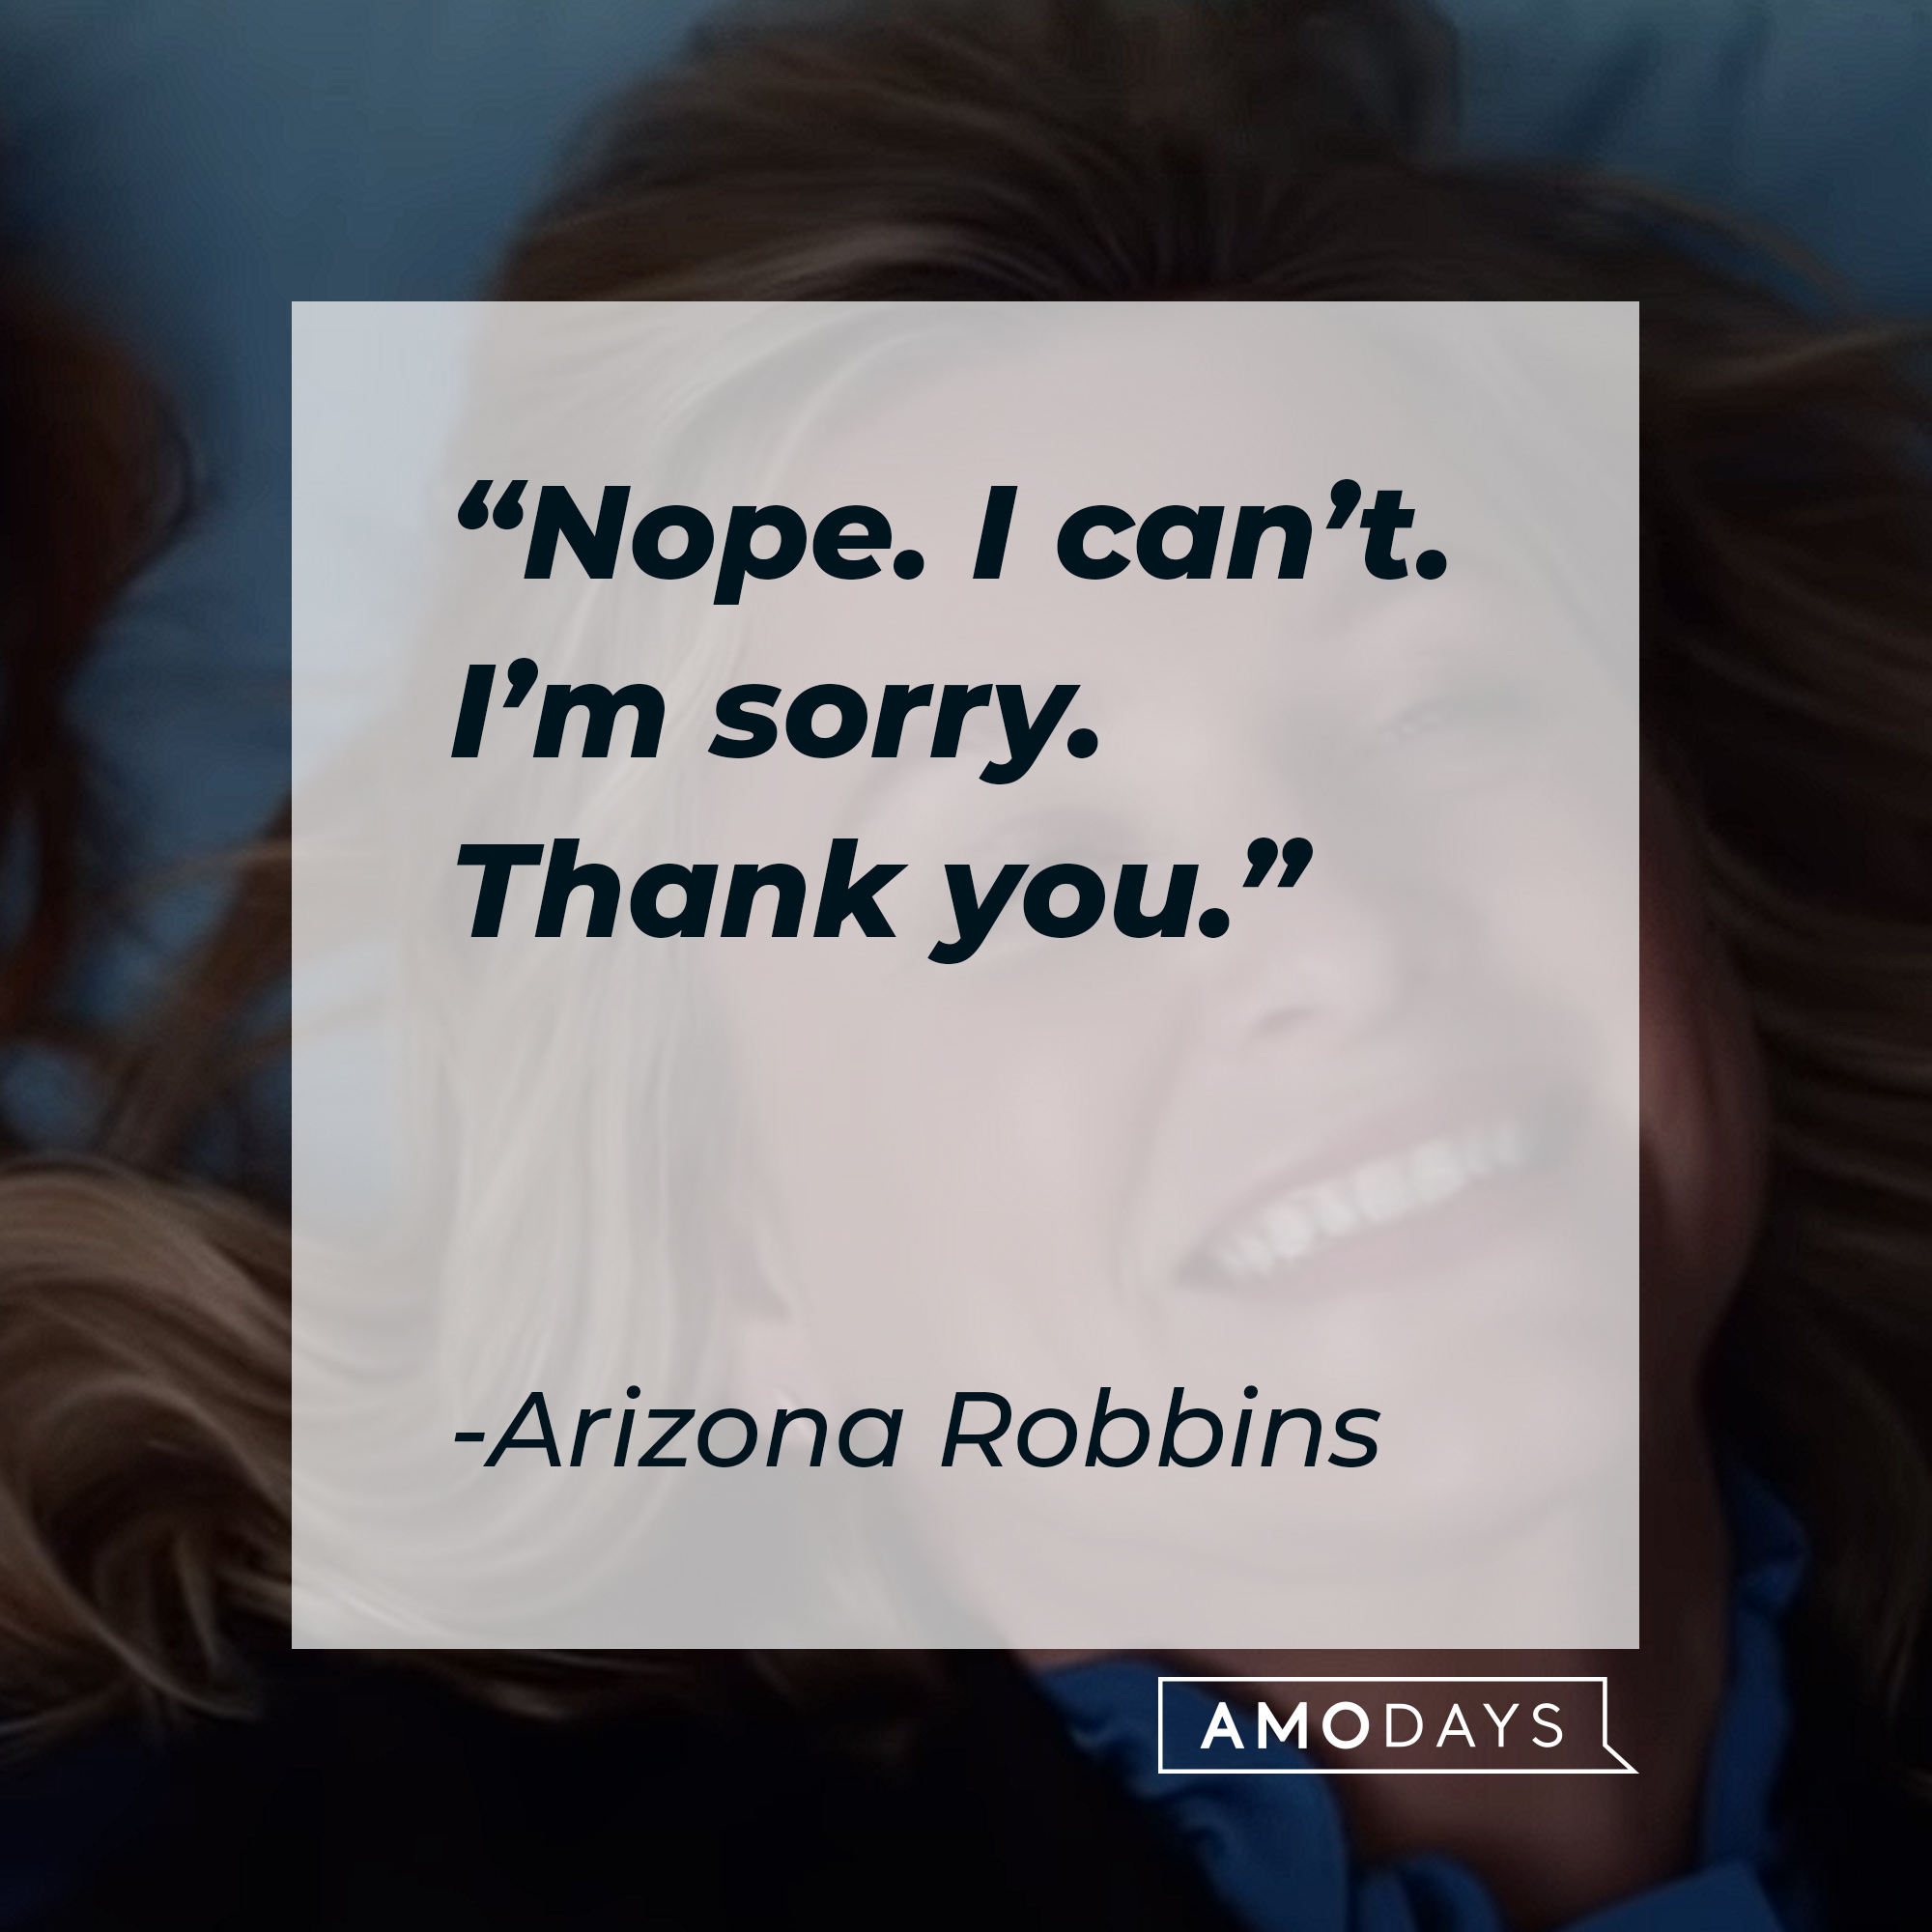 A picture of Arizona Robbins with her quote: “Nope. I can’t. I’m sorry. Thank you.” | Source: youtube.com/ABCNetwork